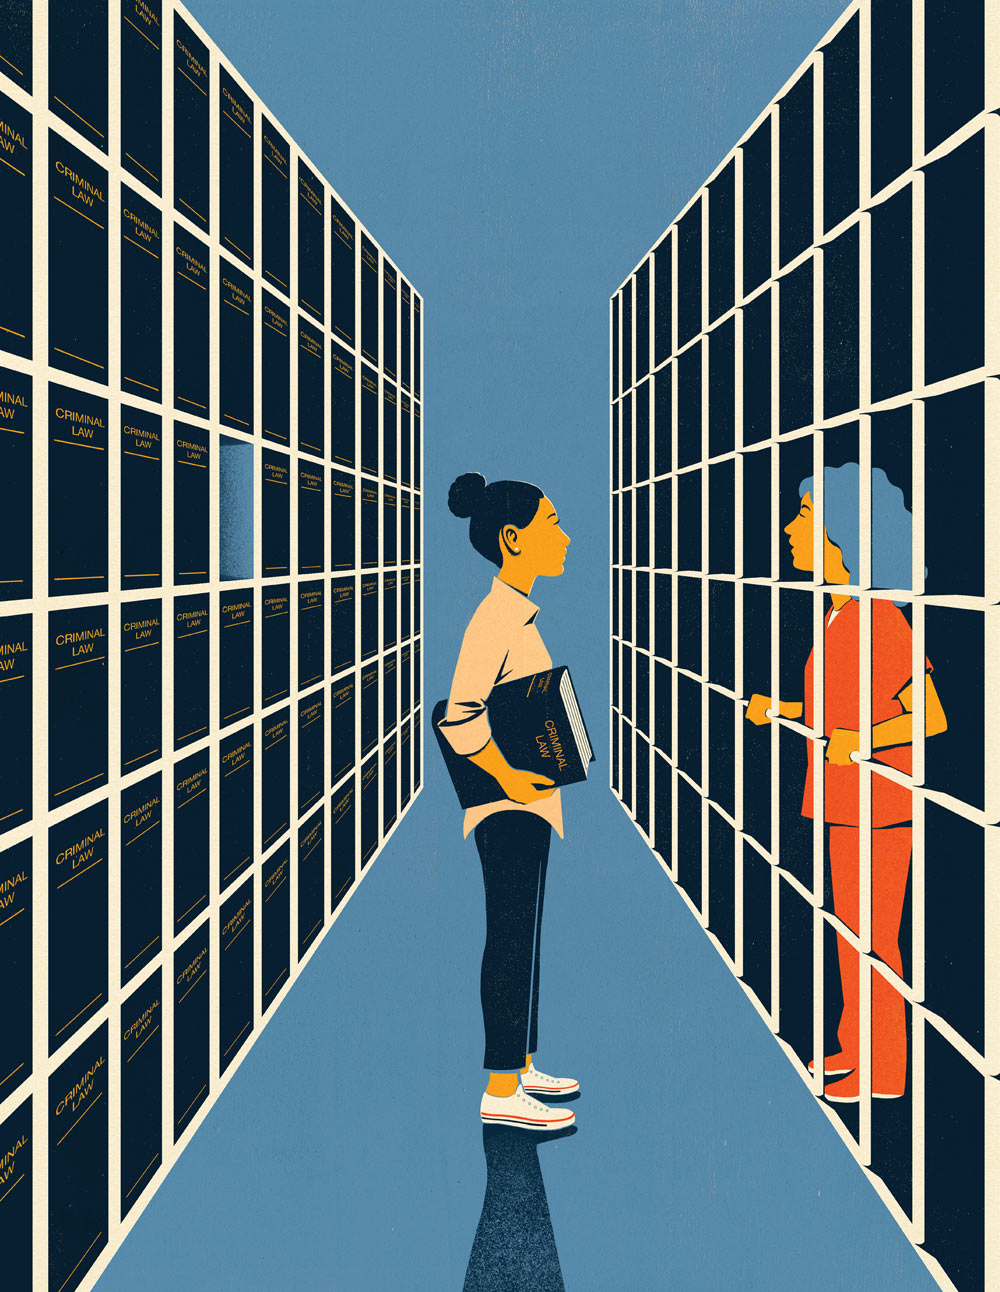 digital illustration of a woman in a prison cell and a woman standing on the outside of the cell holding a Criminal Law book